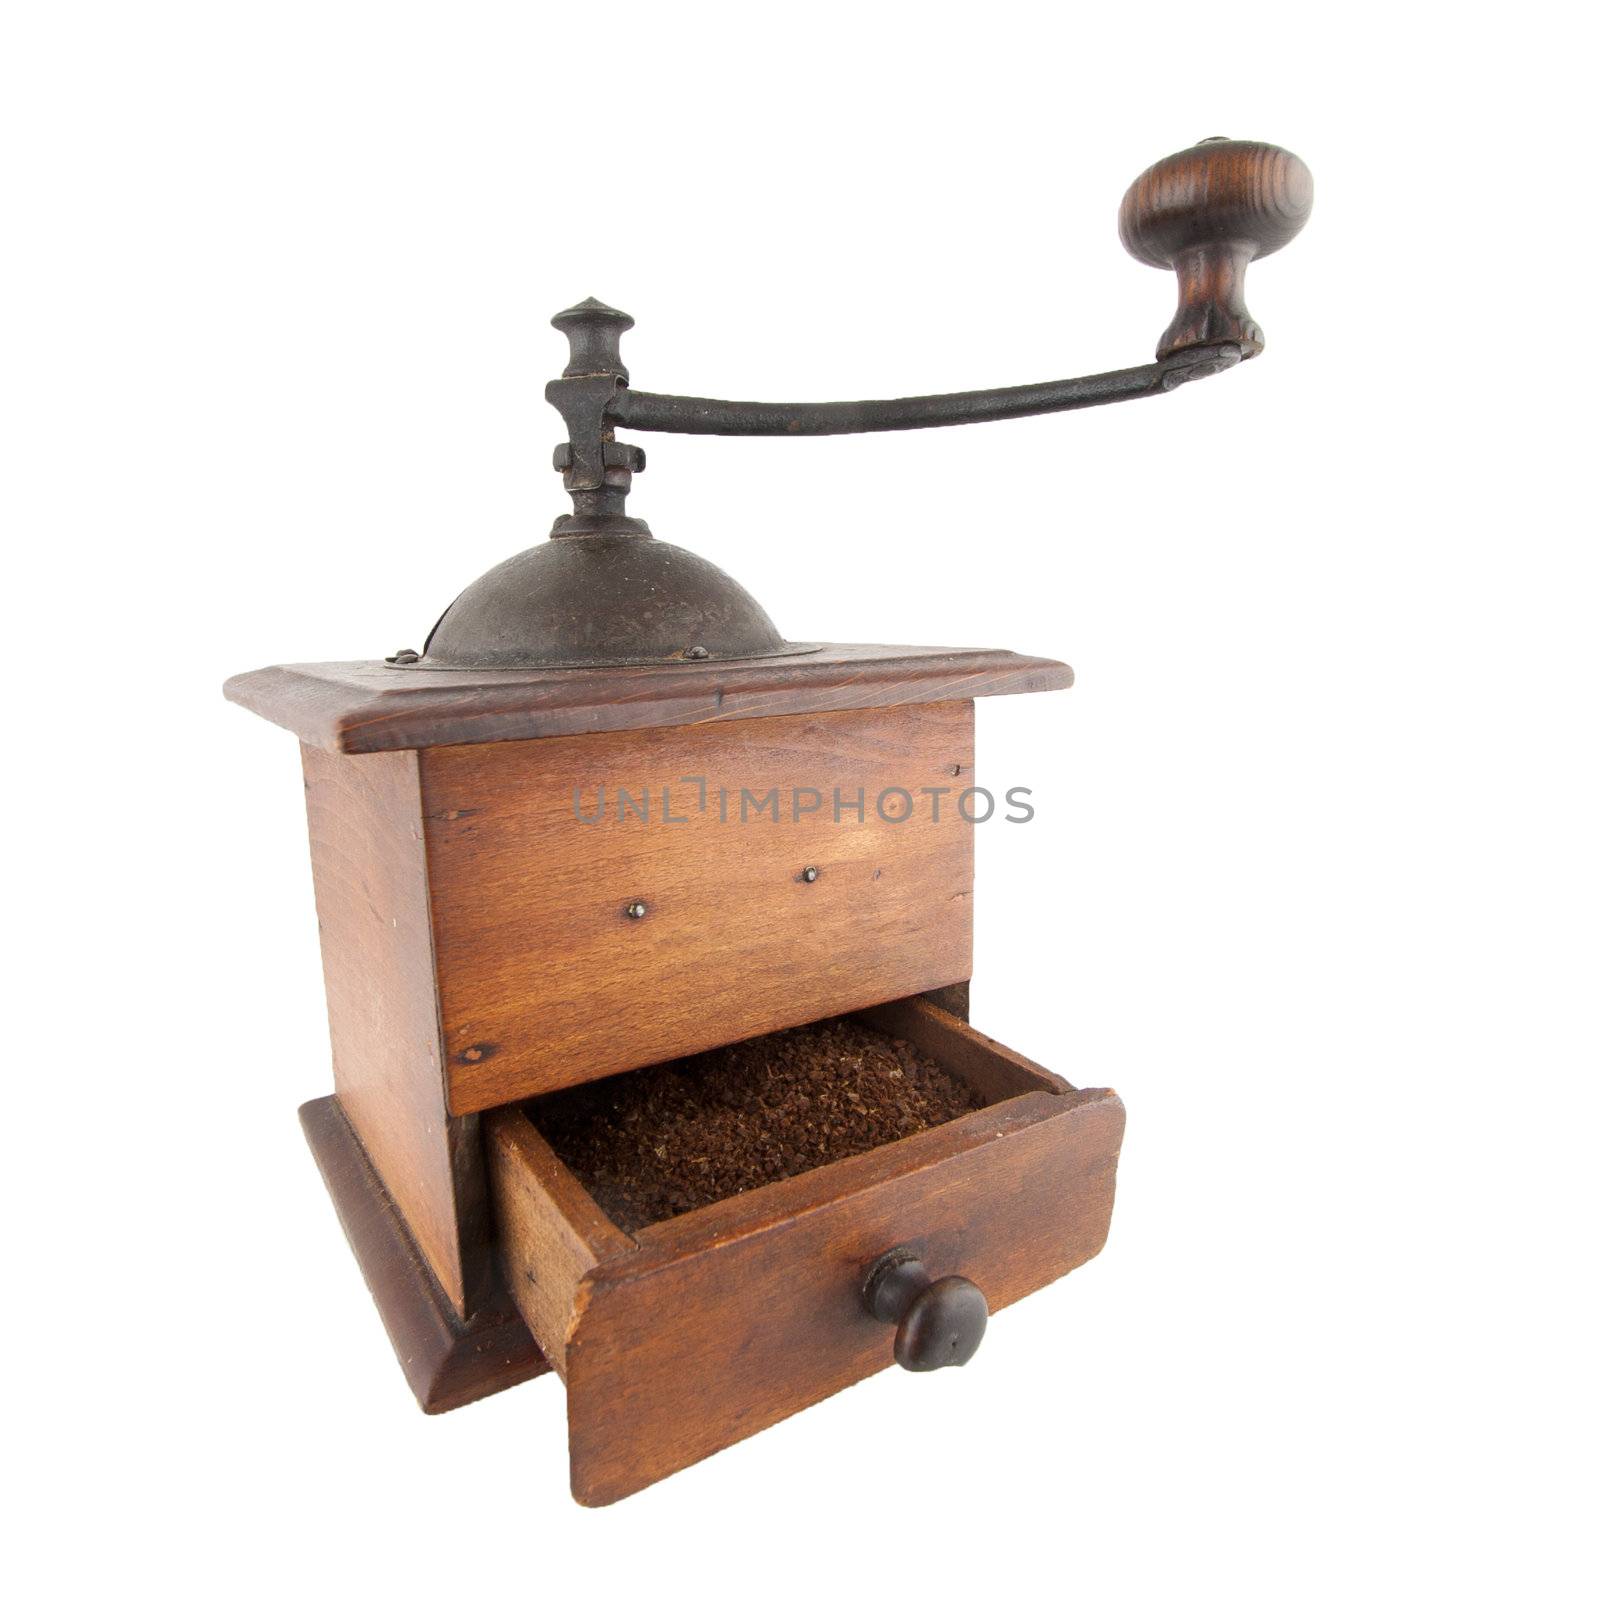 Old coffee grinder with ground coffee in the drawer